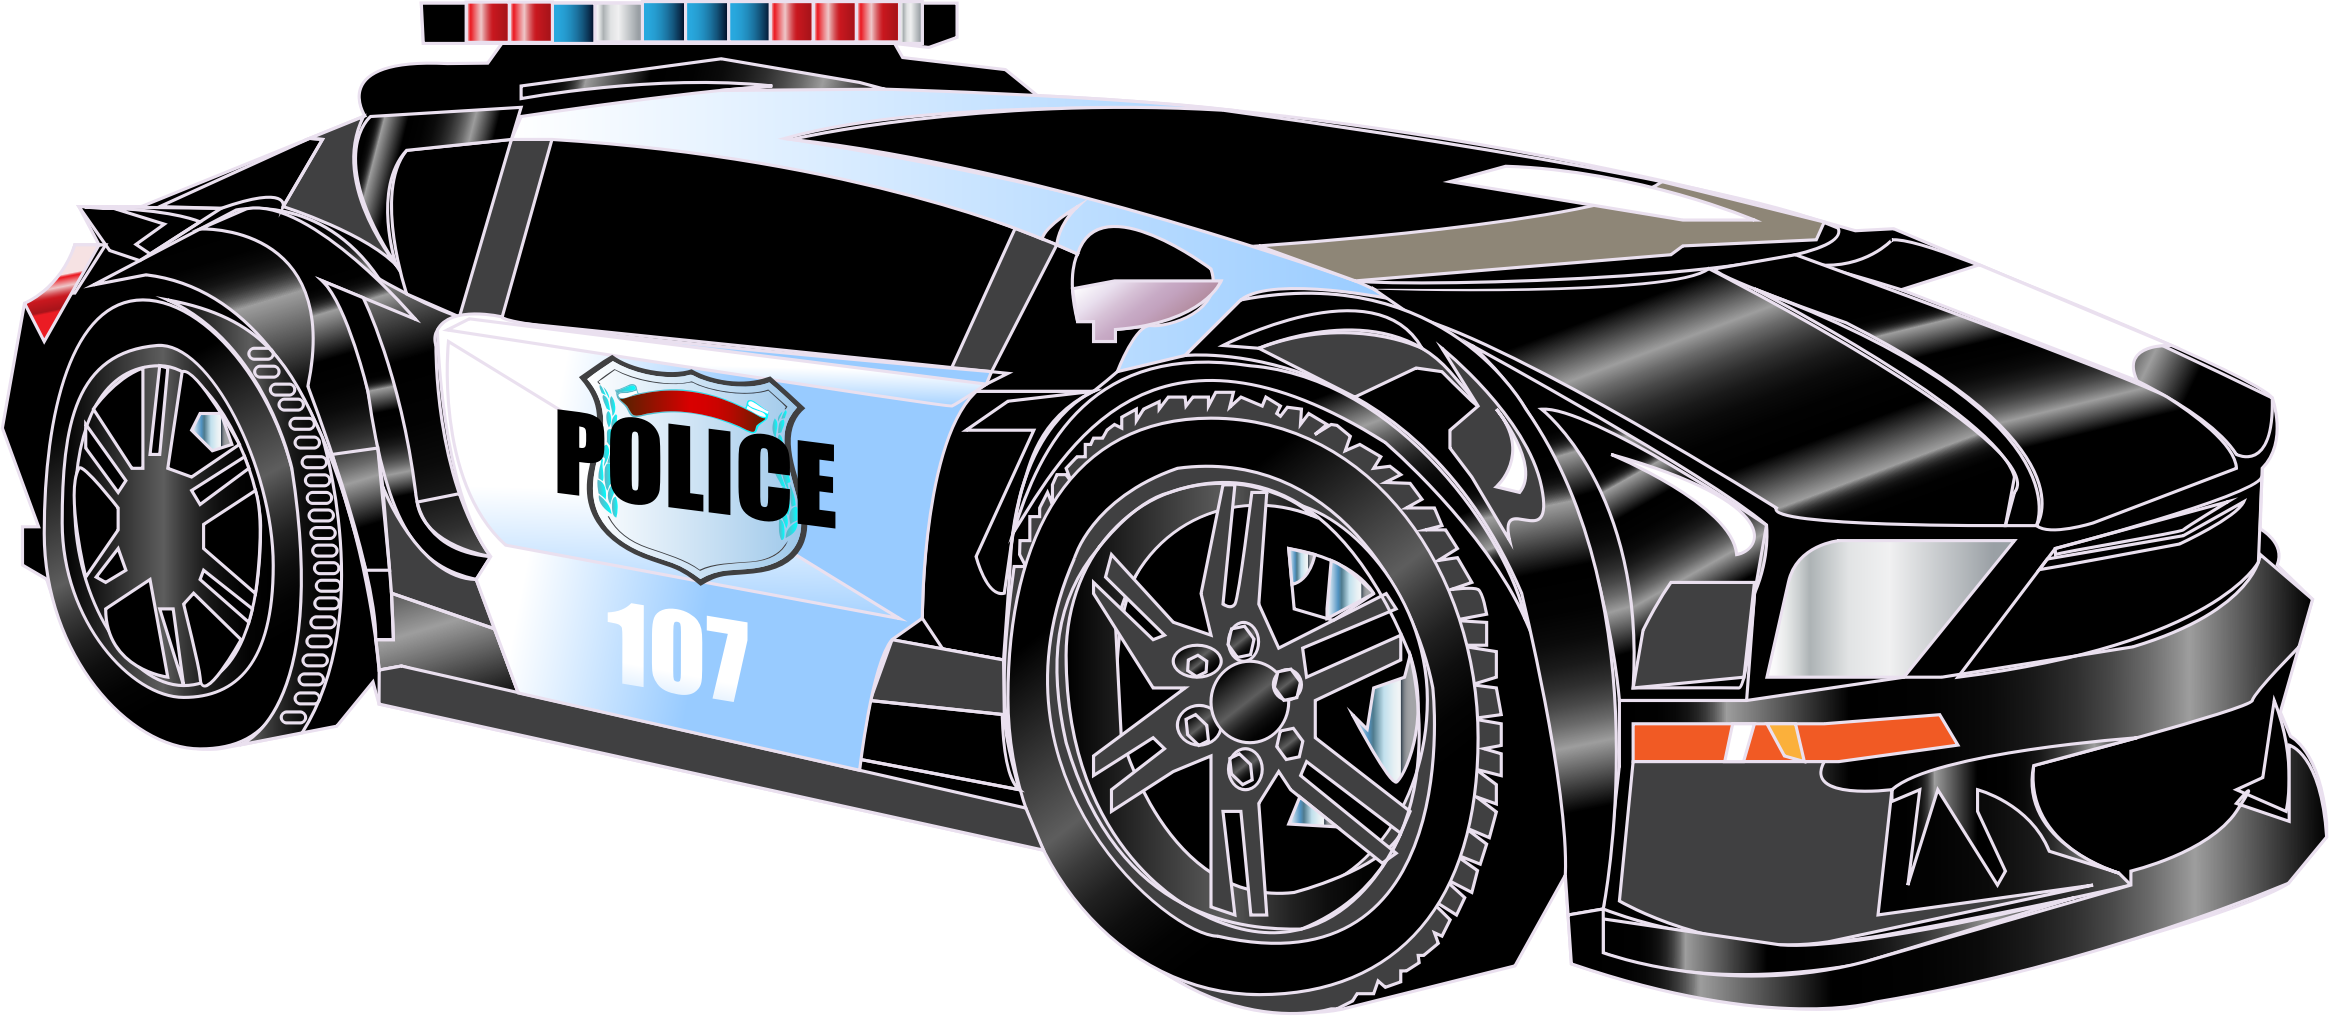 Clipart Police Car 2   Police Car Hd Png - Police, Transparent background PNG HD thumbnail